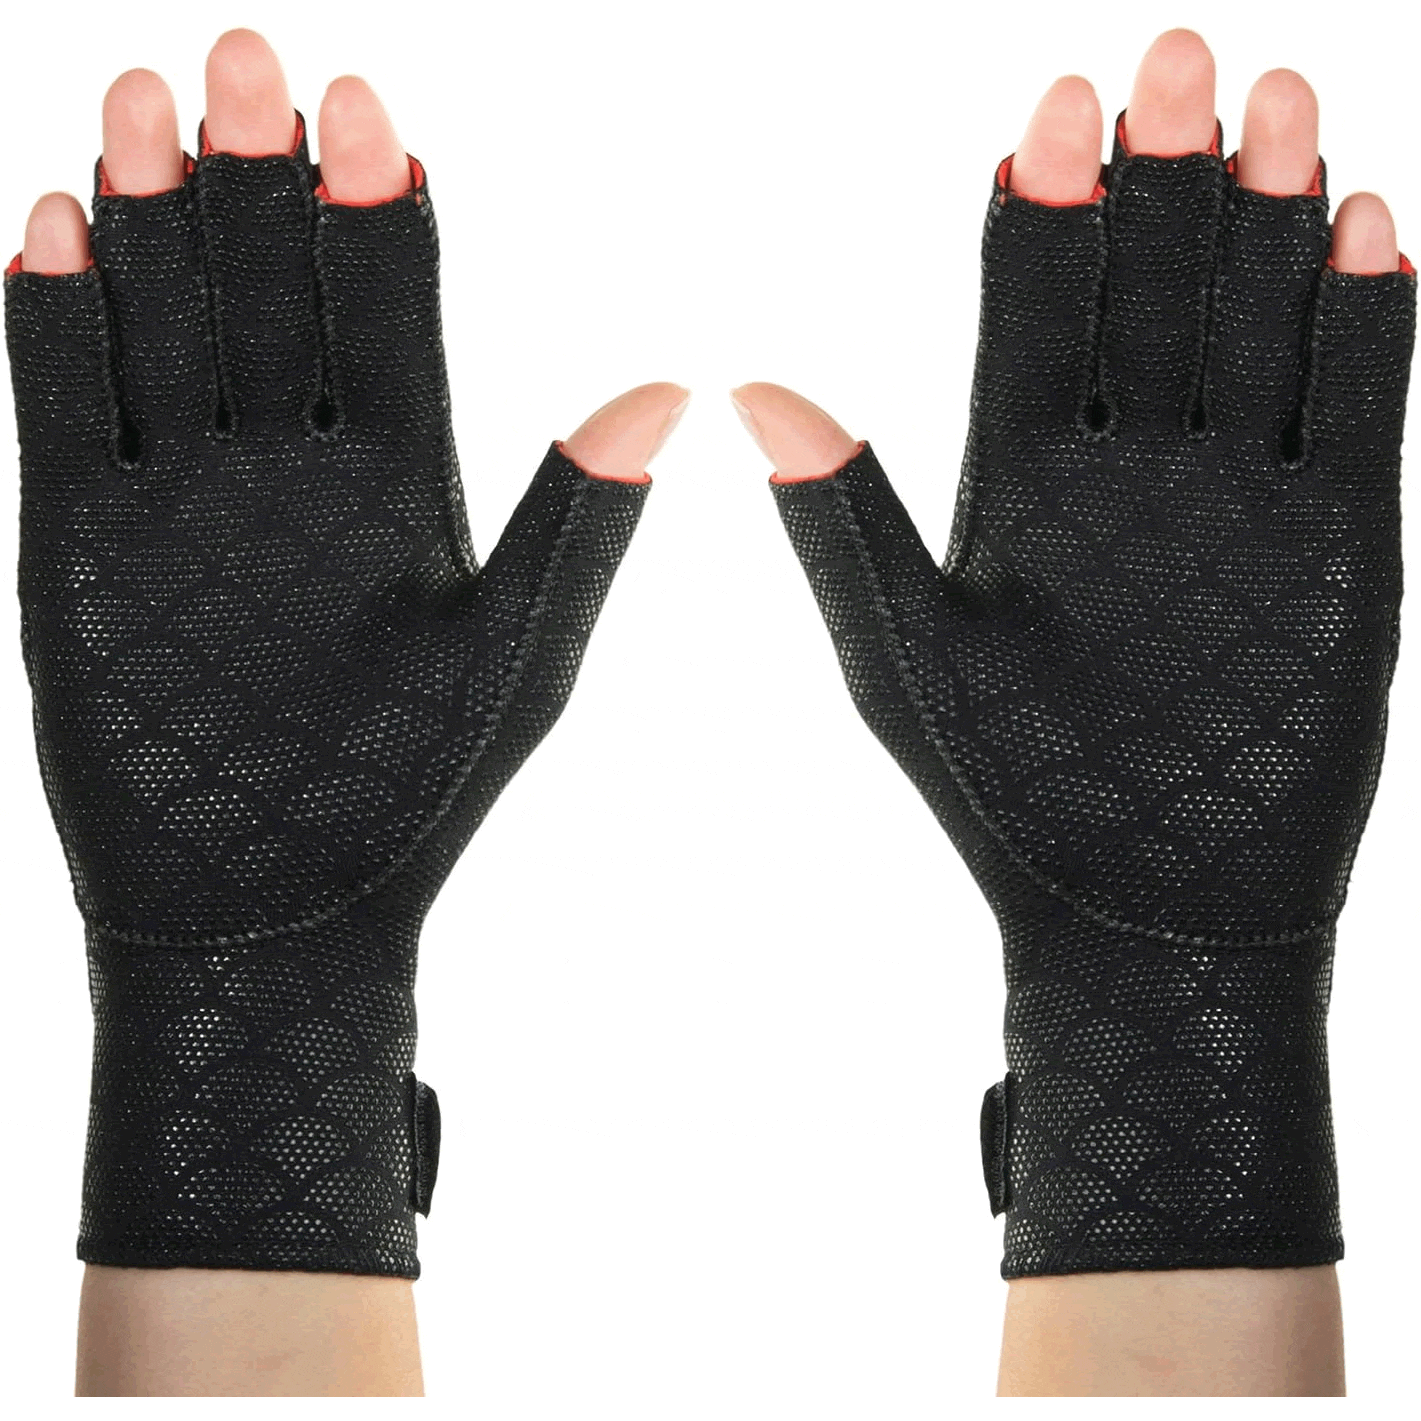 View Thermoskin Thermal Arthritic Gloves Small information